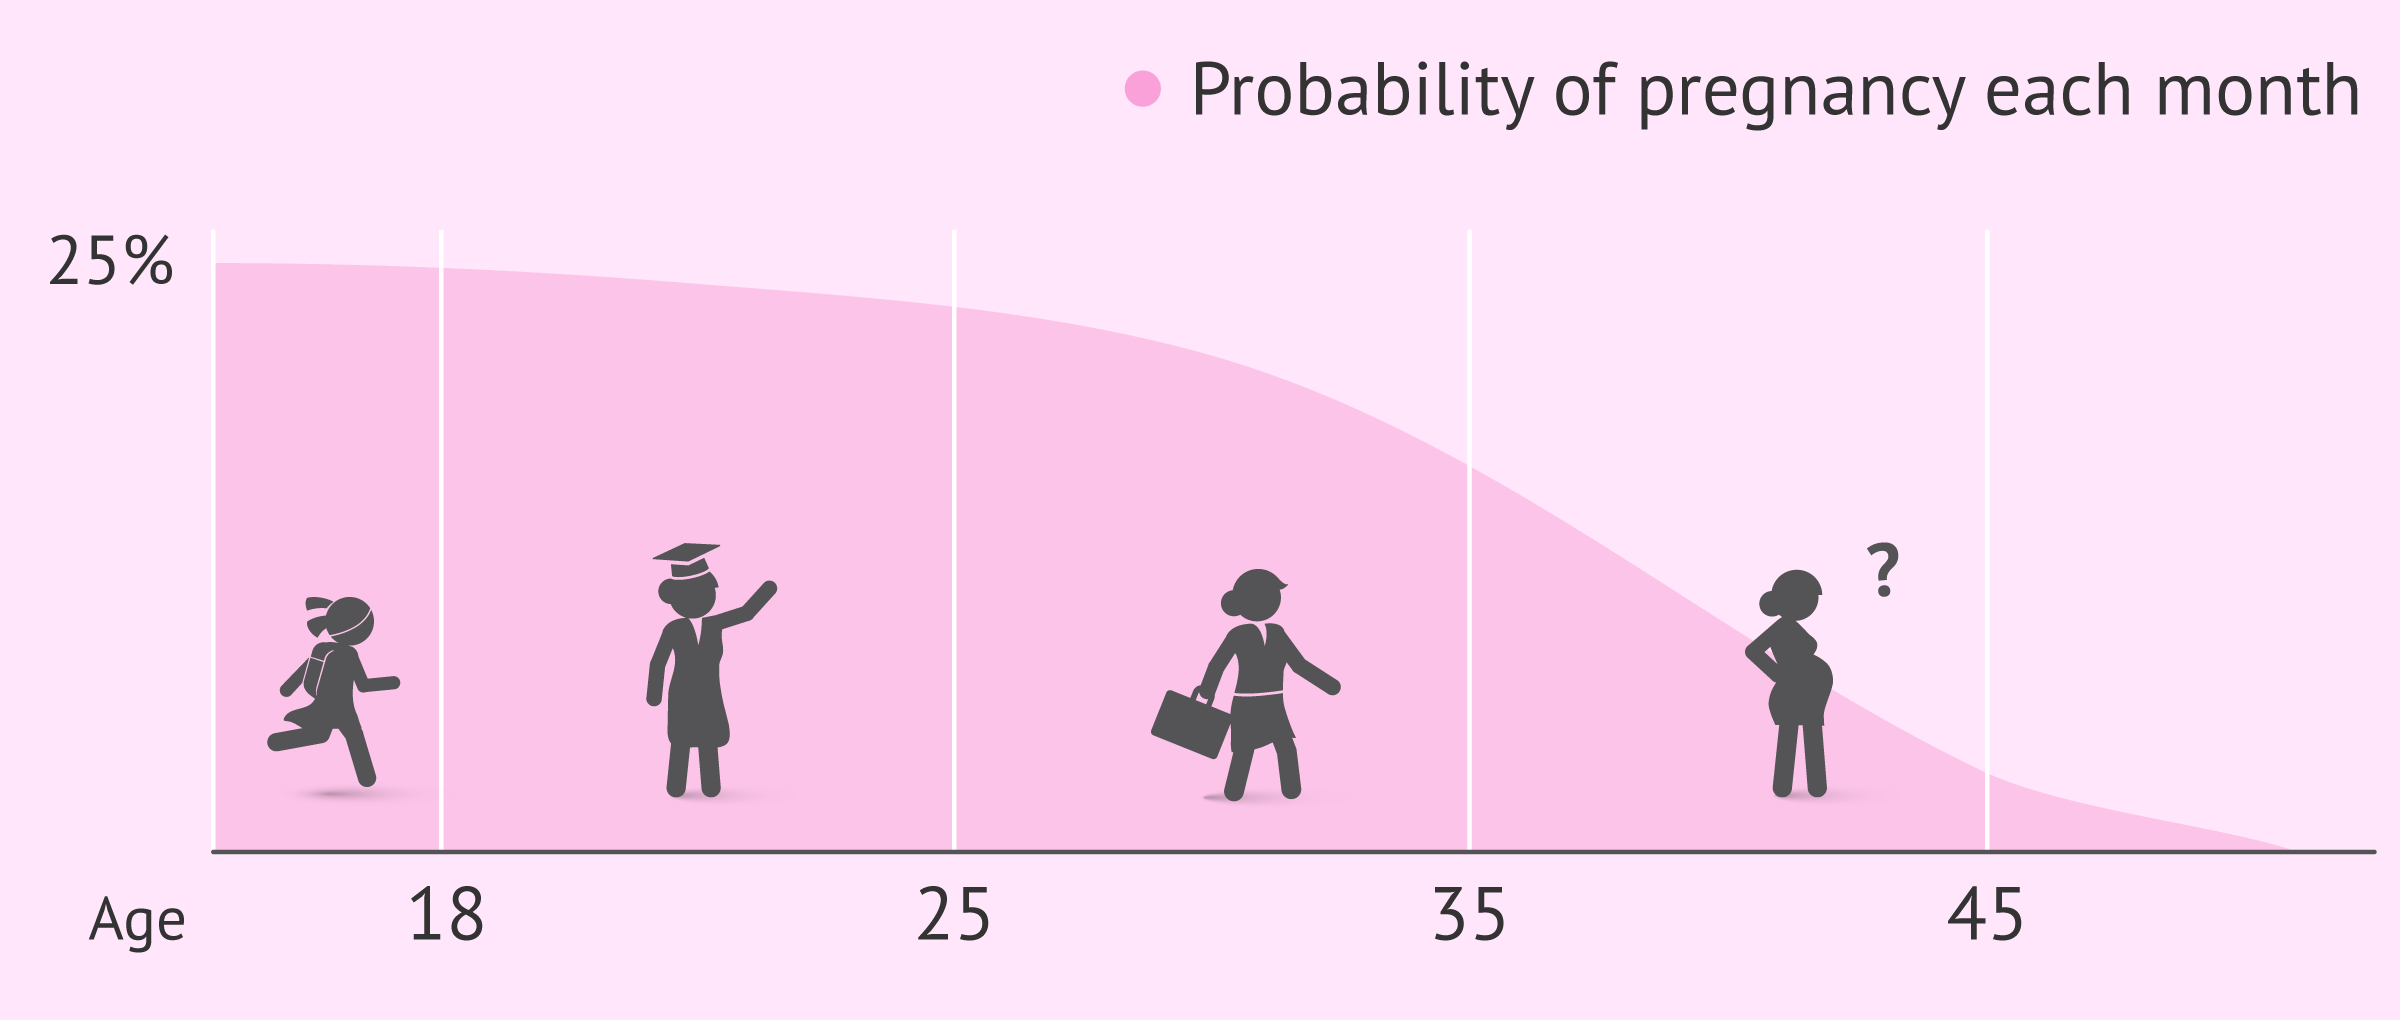 Decreasing probability of monthly pregnancy with age